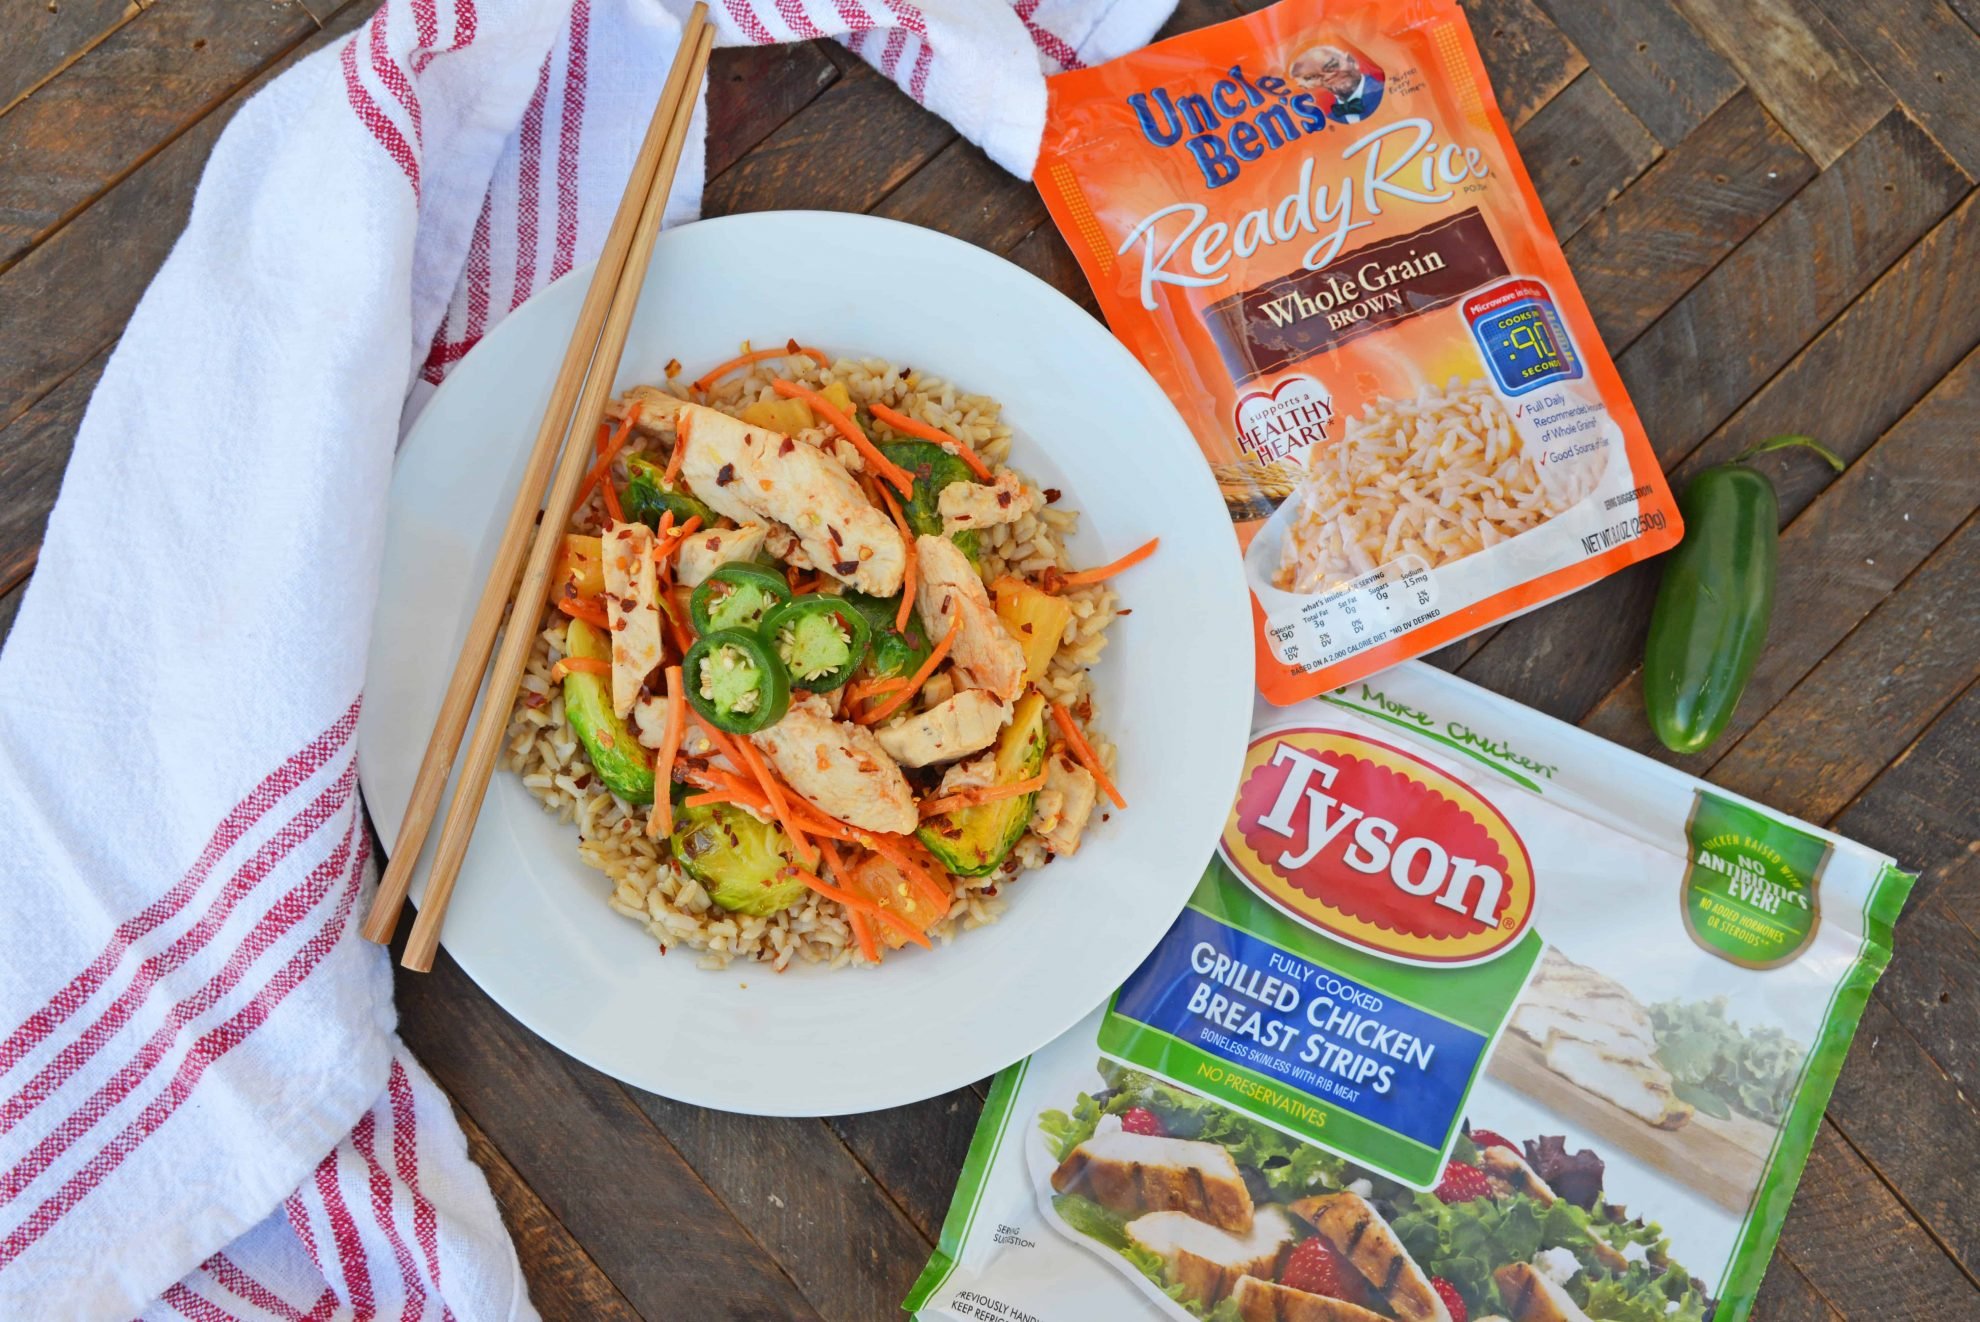 Quick Szechuan Chicken and Rice is an easy dinner recipe featuring chicken strips, brussels sprouts, carrots and pineapple over brown rice. All ready in 15 minutes! #quickchickendinners #szechuanchicken www.savoryexperiments.com 